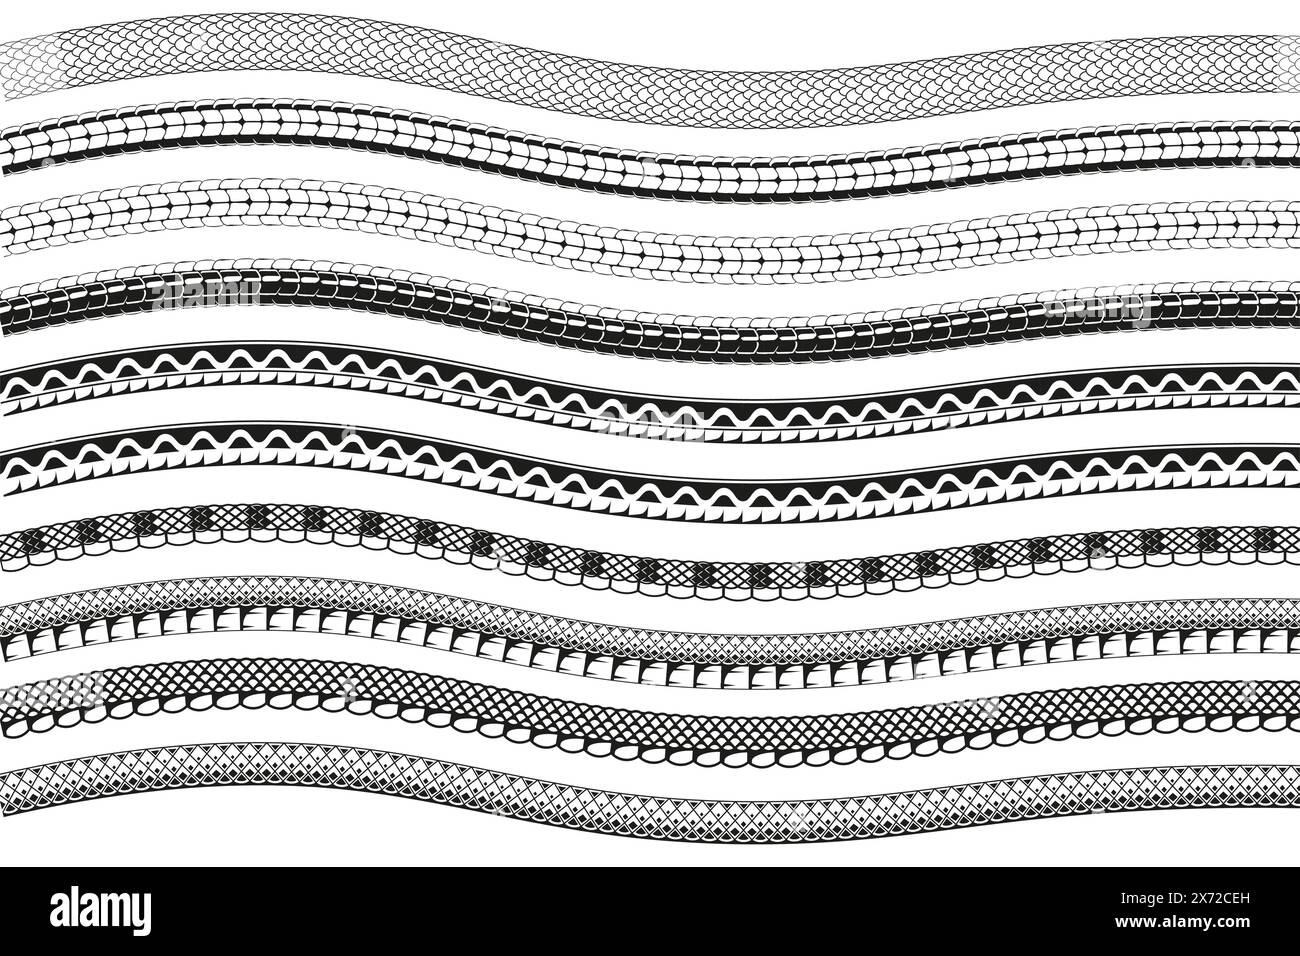 Snake skin texture set,symbol of the year 2025. Black linear style. Vector illustration  isolated white background. Stock Vector